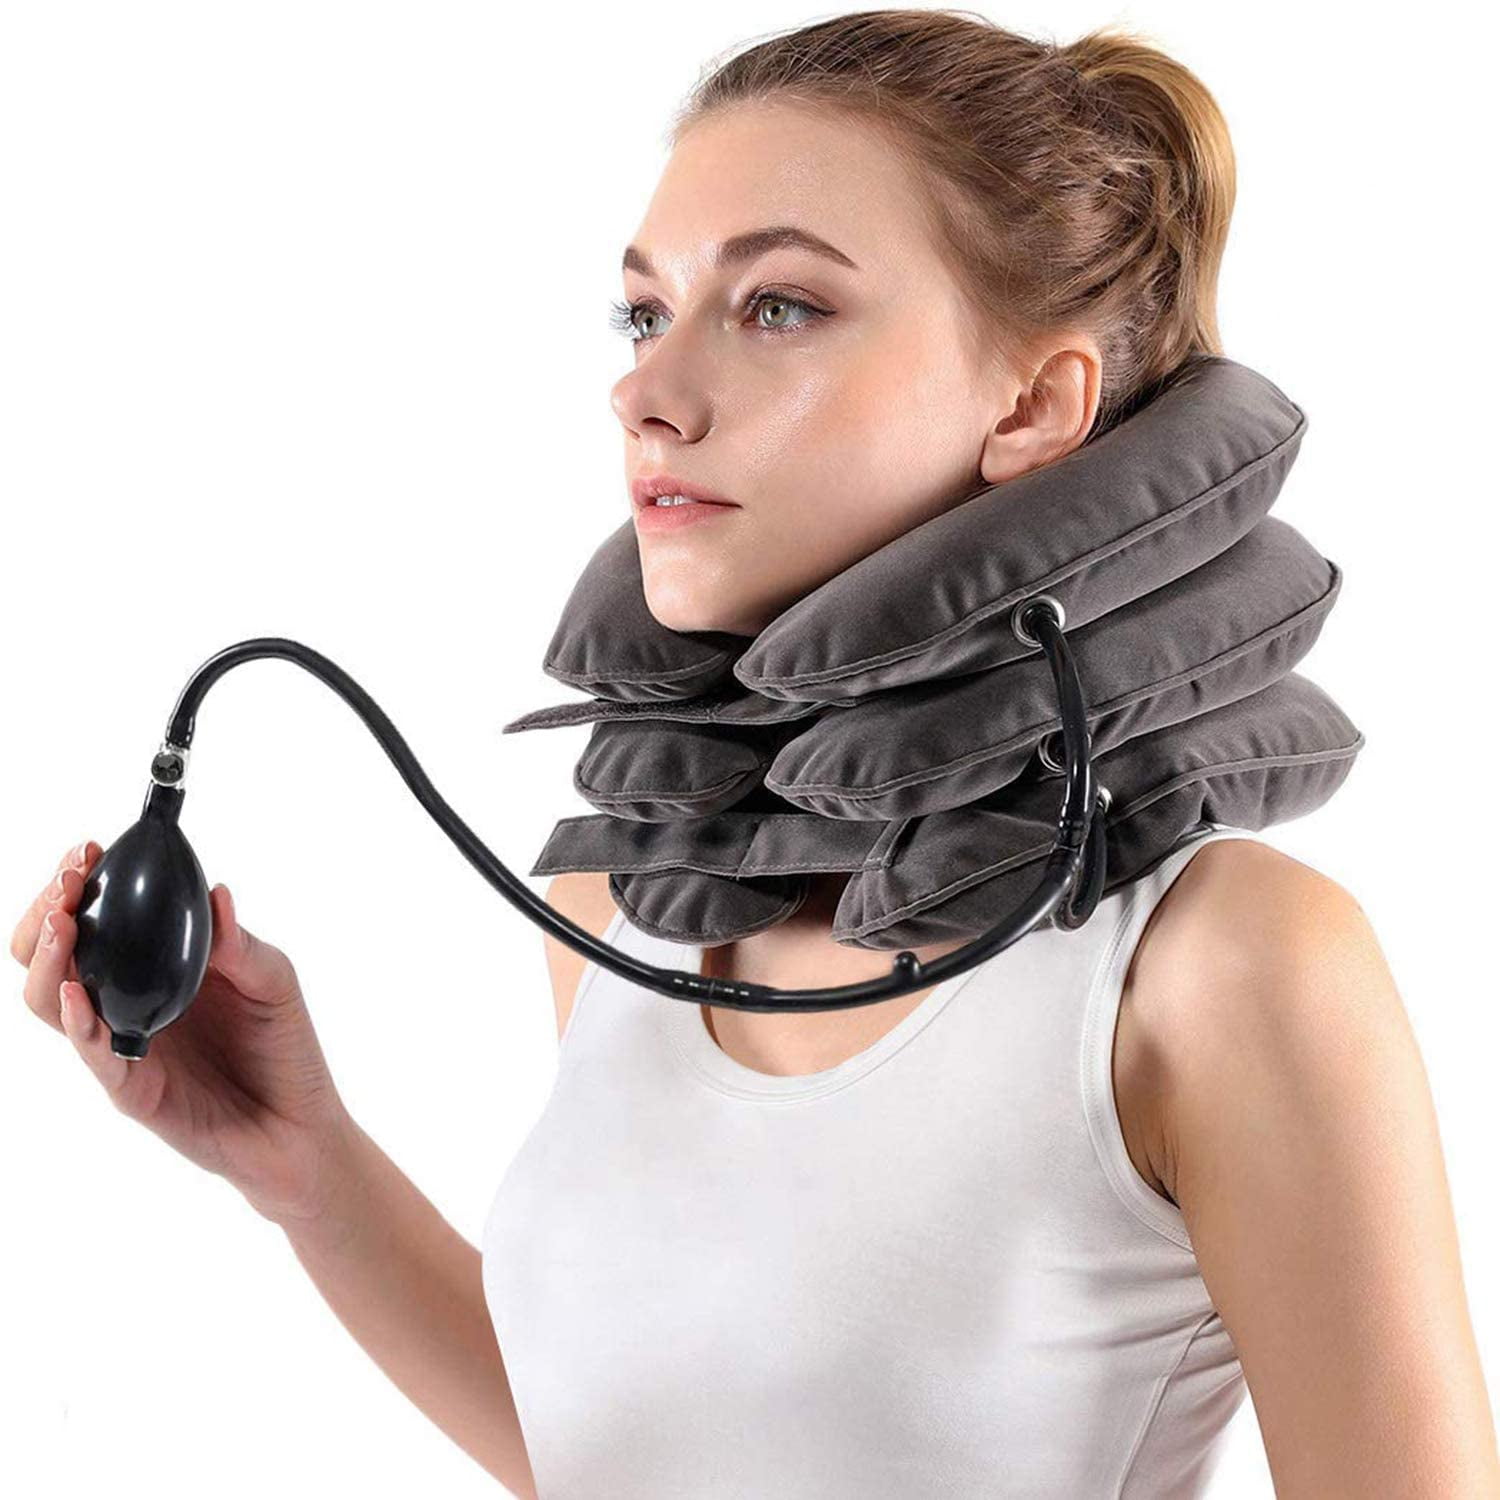 Neck Ache? Here's Best Neck Massager for 5 Min Relief